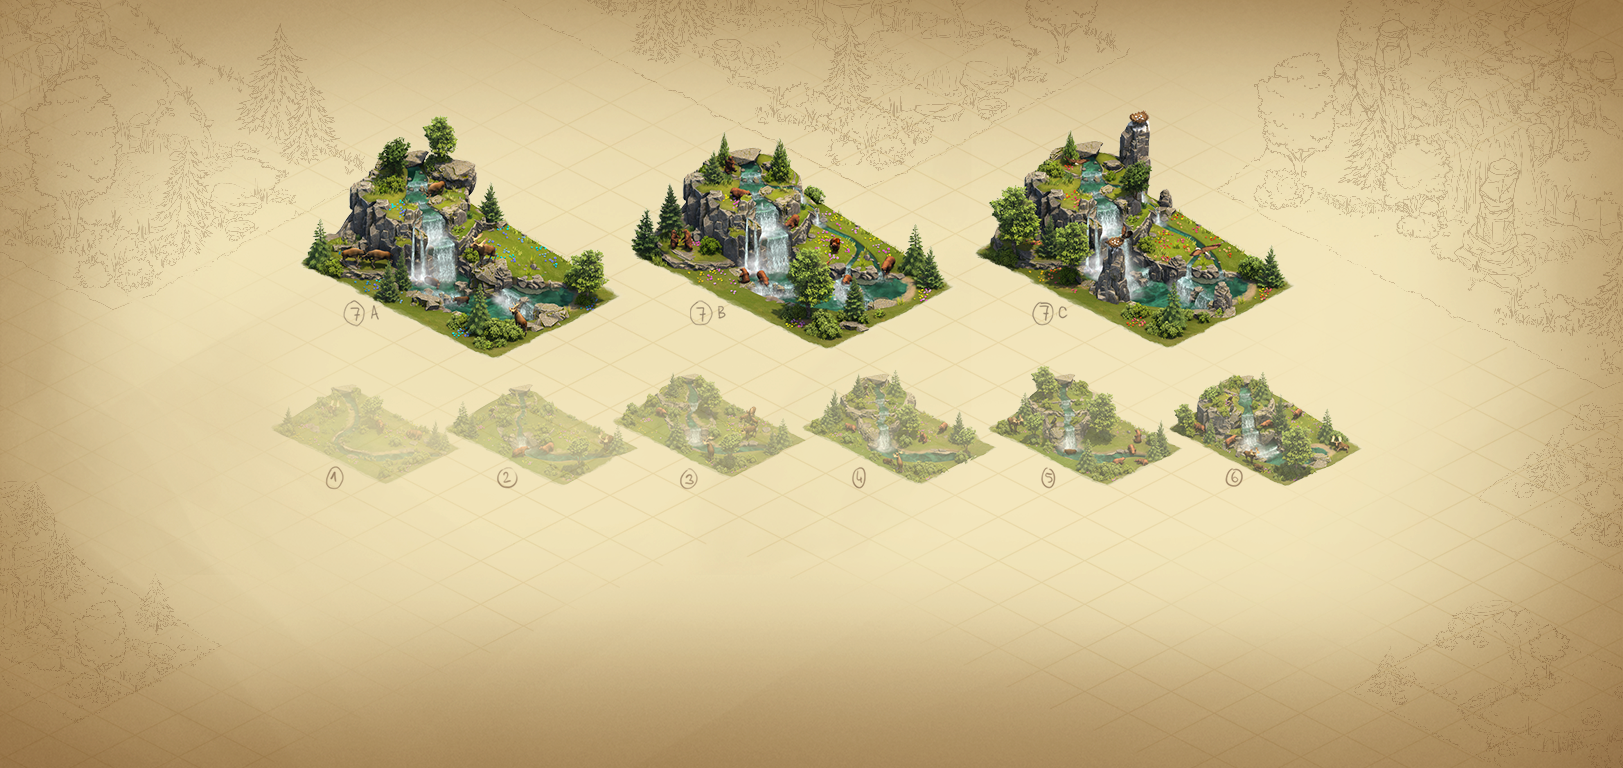 forge of empires archaeology event daily prizes